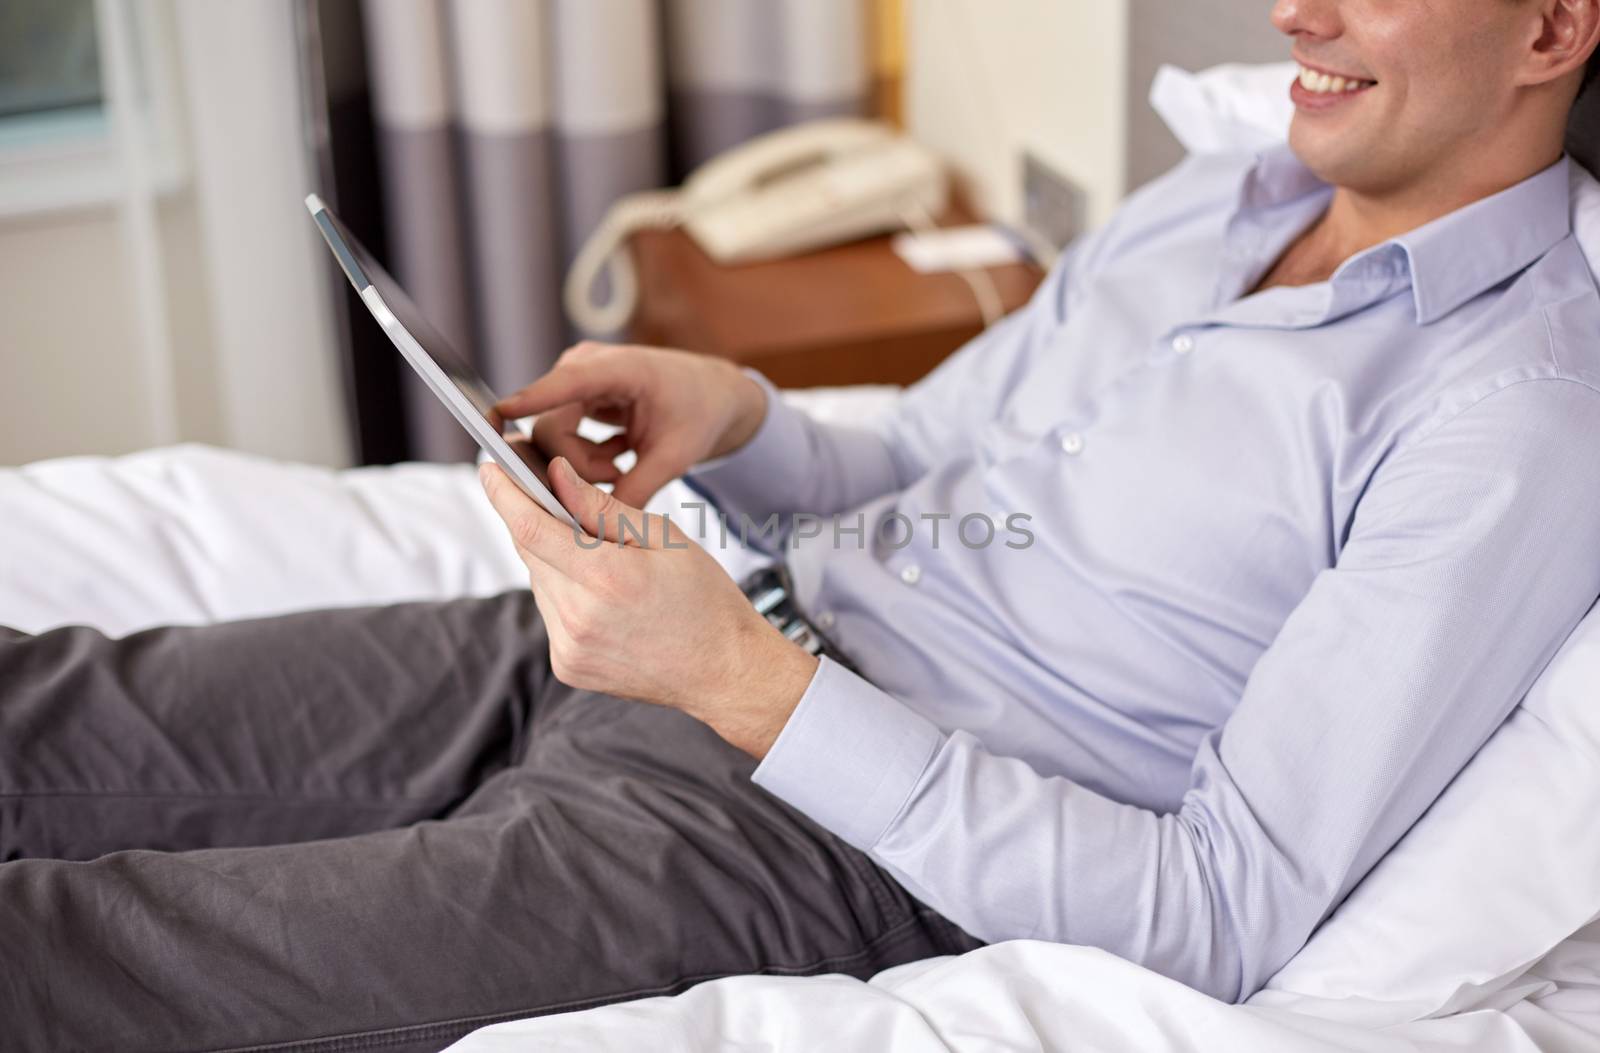 business trip, technology, internet and people concept - smiling businessman with tablet pc computer lying on bed at hotel room